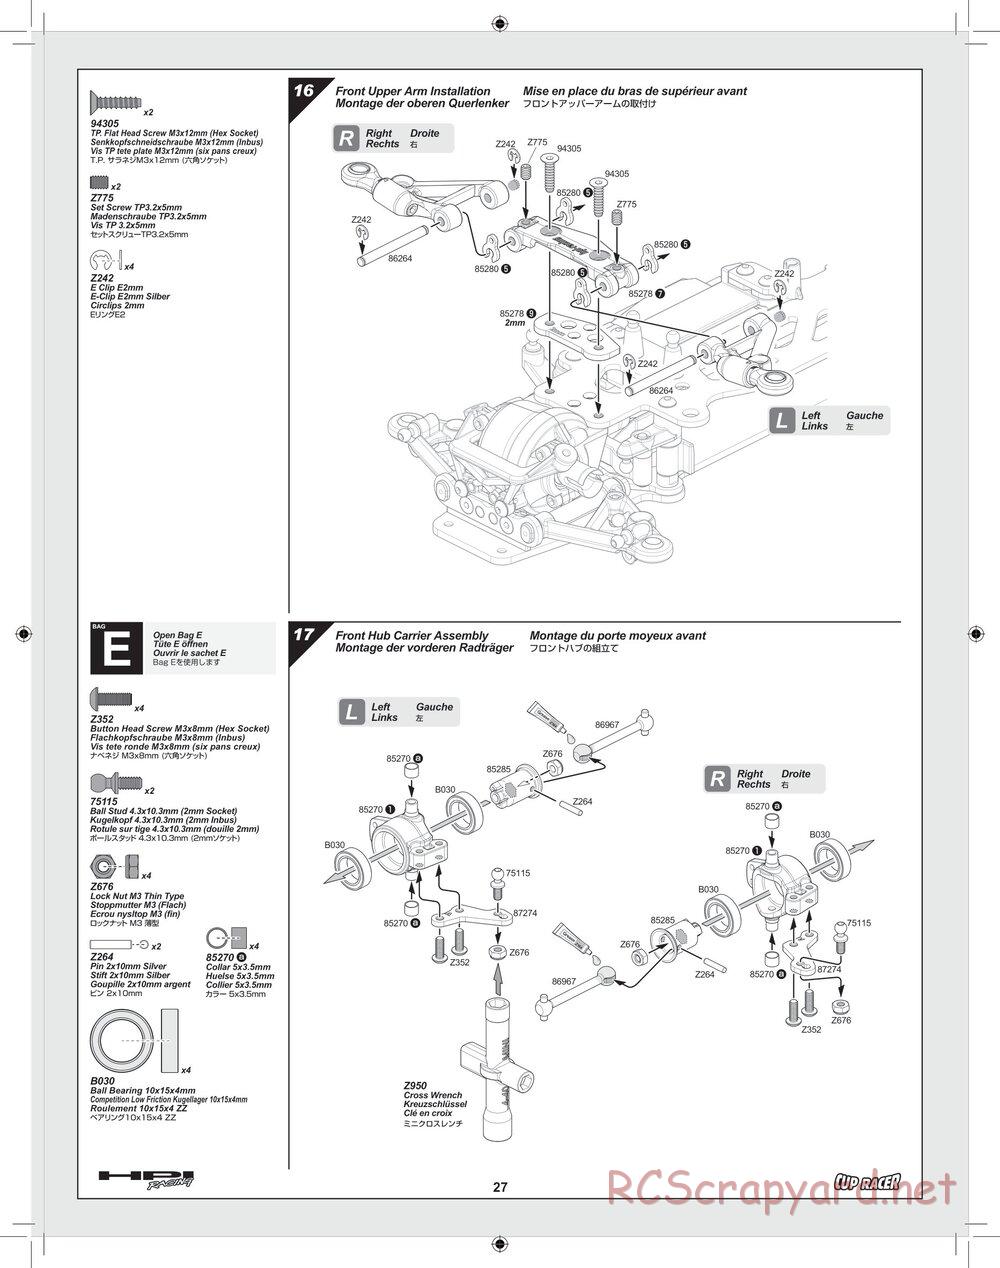 HPI - Cup Racer - Manual - Page 27